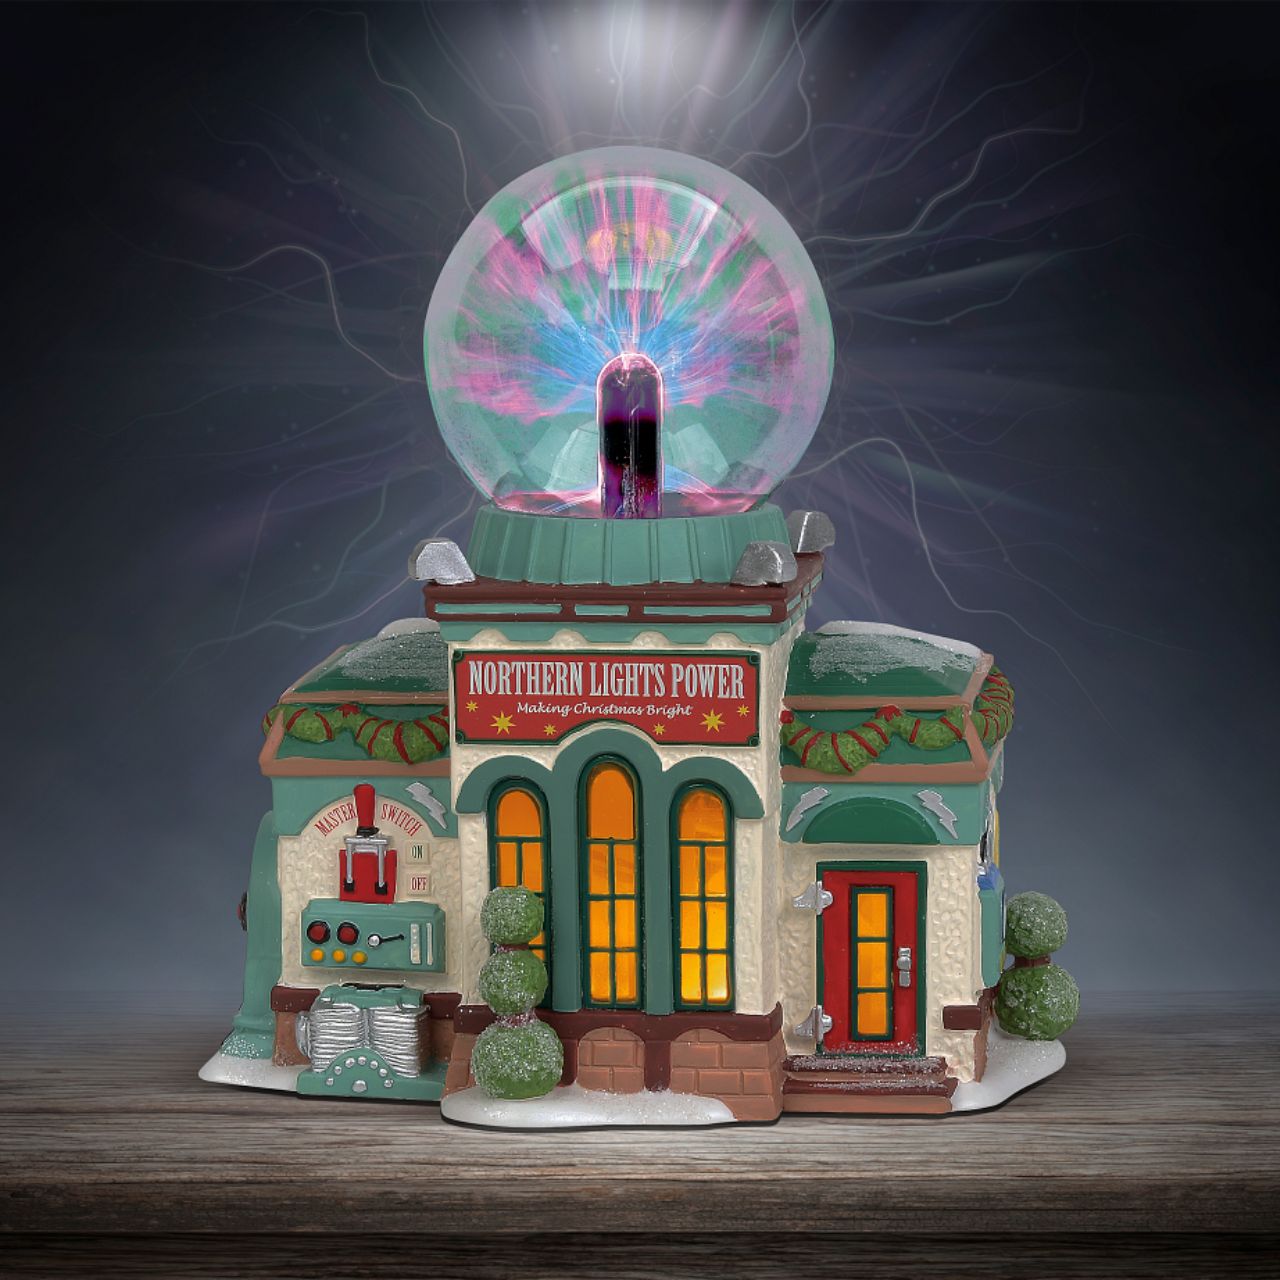 Department 56 North Pole Village Northern Lights Power Lit Building  Running a toy workshop around the clock uses a lot of electricity. Thankfully for Santa, elf scientists have harnessed the power of the Northern Lights into a limitless source of clean energy. Features a plasma globe creating electric light effect. Includes 3-pin plug.